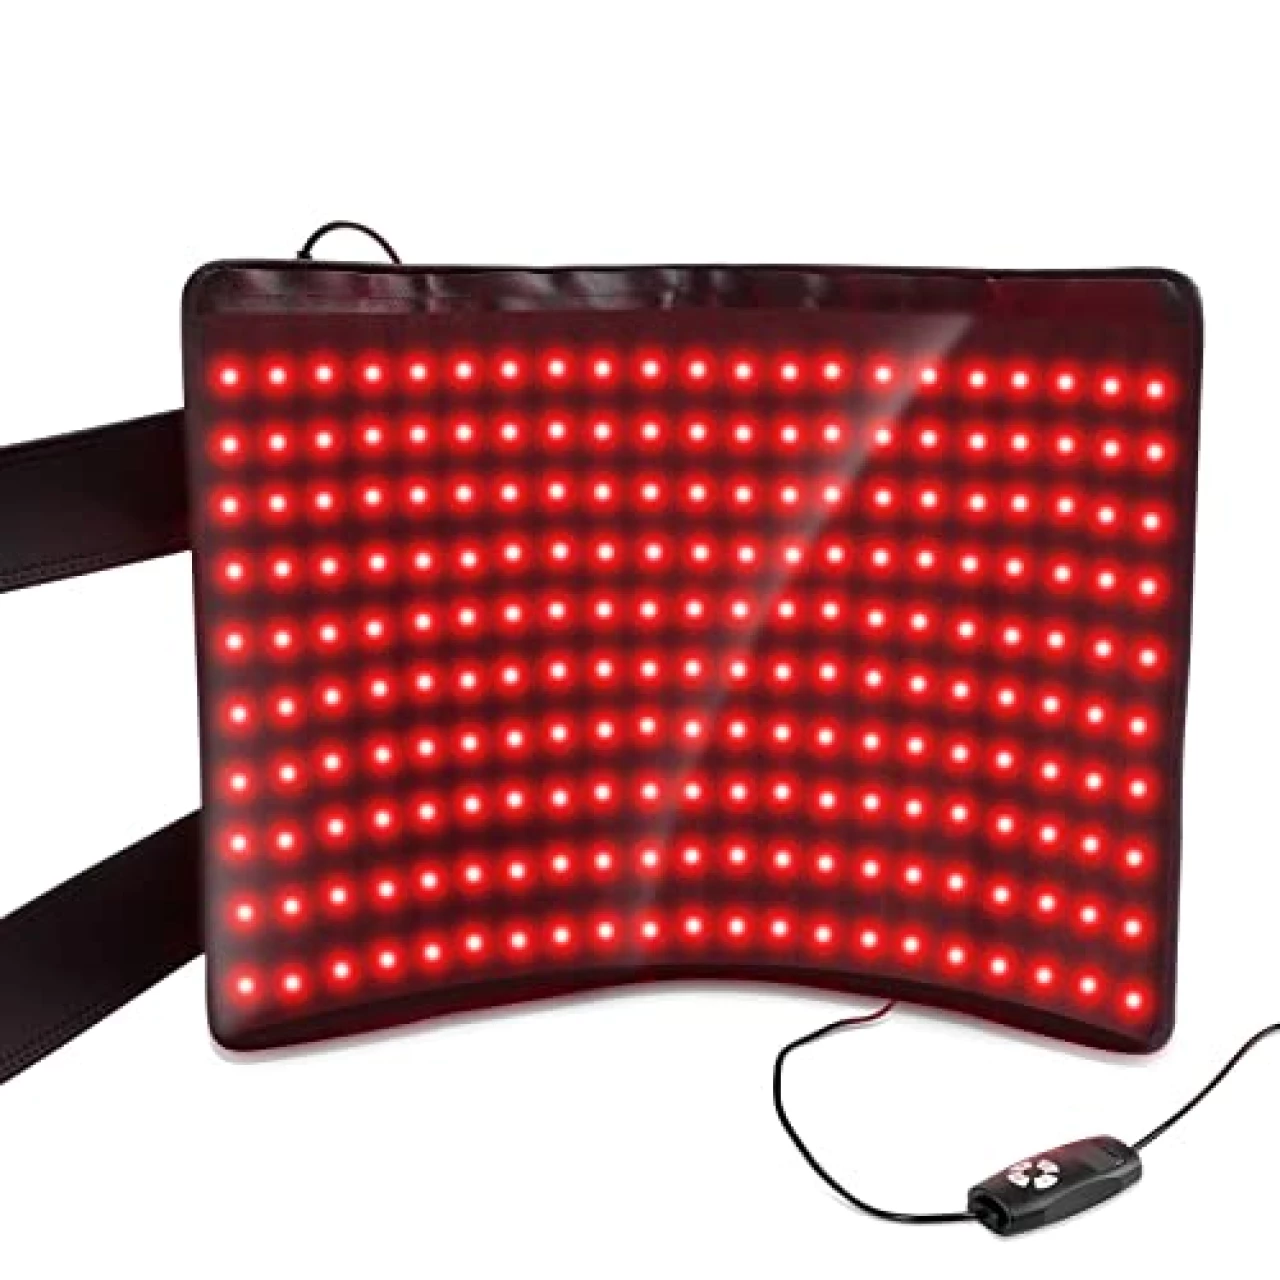 LOVTRAVEL Red Light Therapy